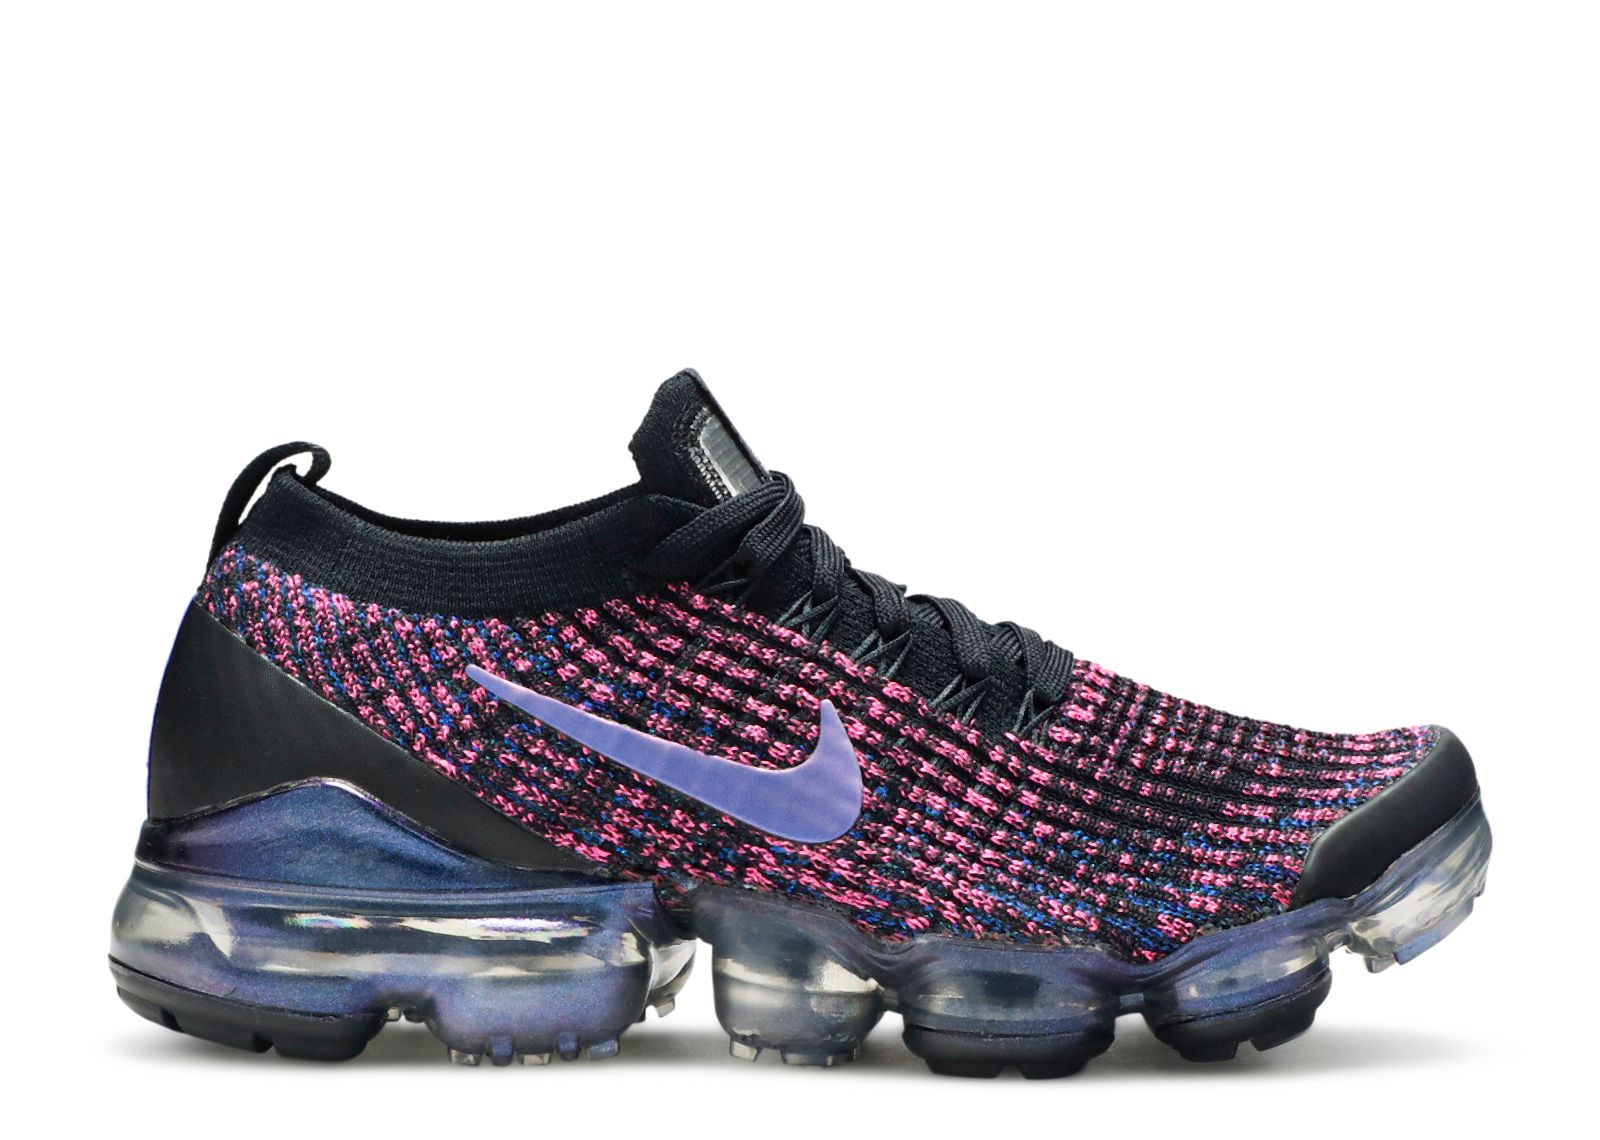 vapormax back to the future 